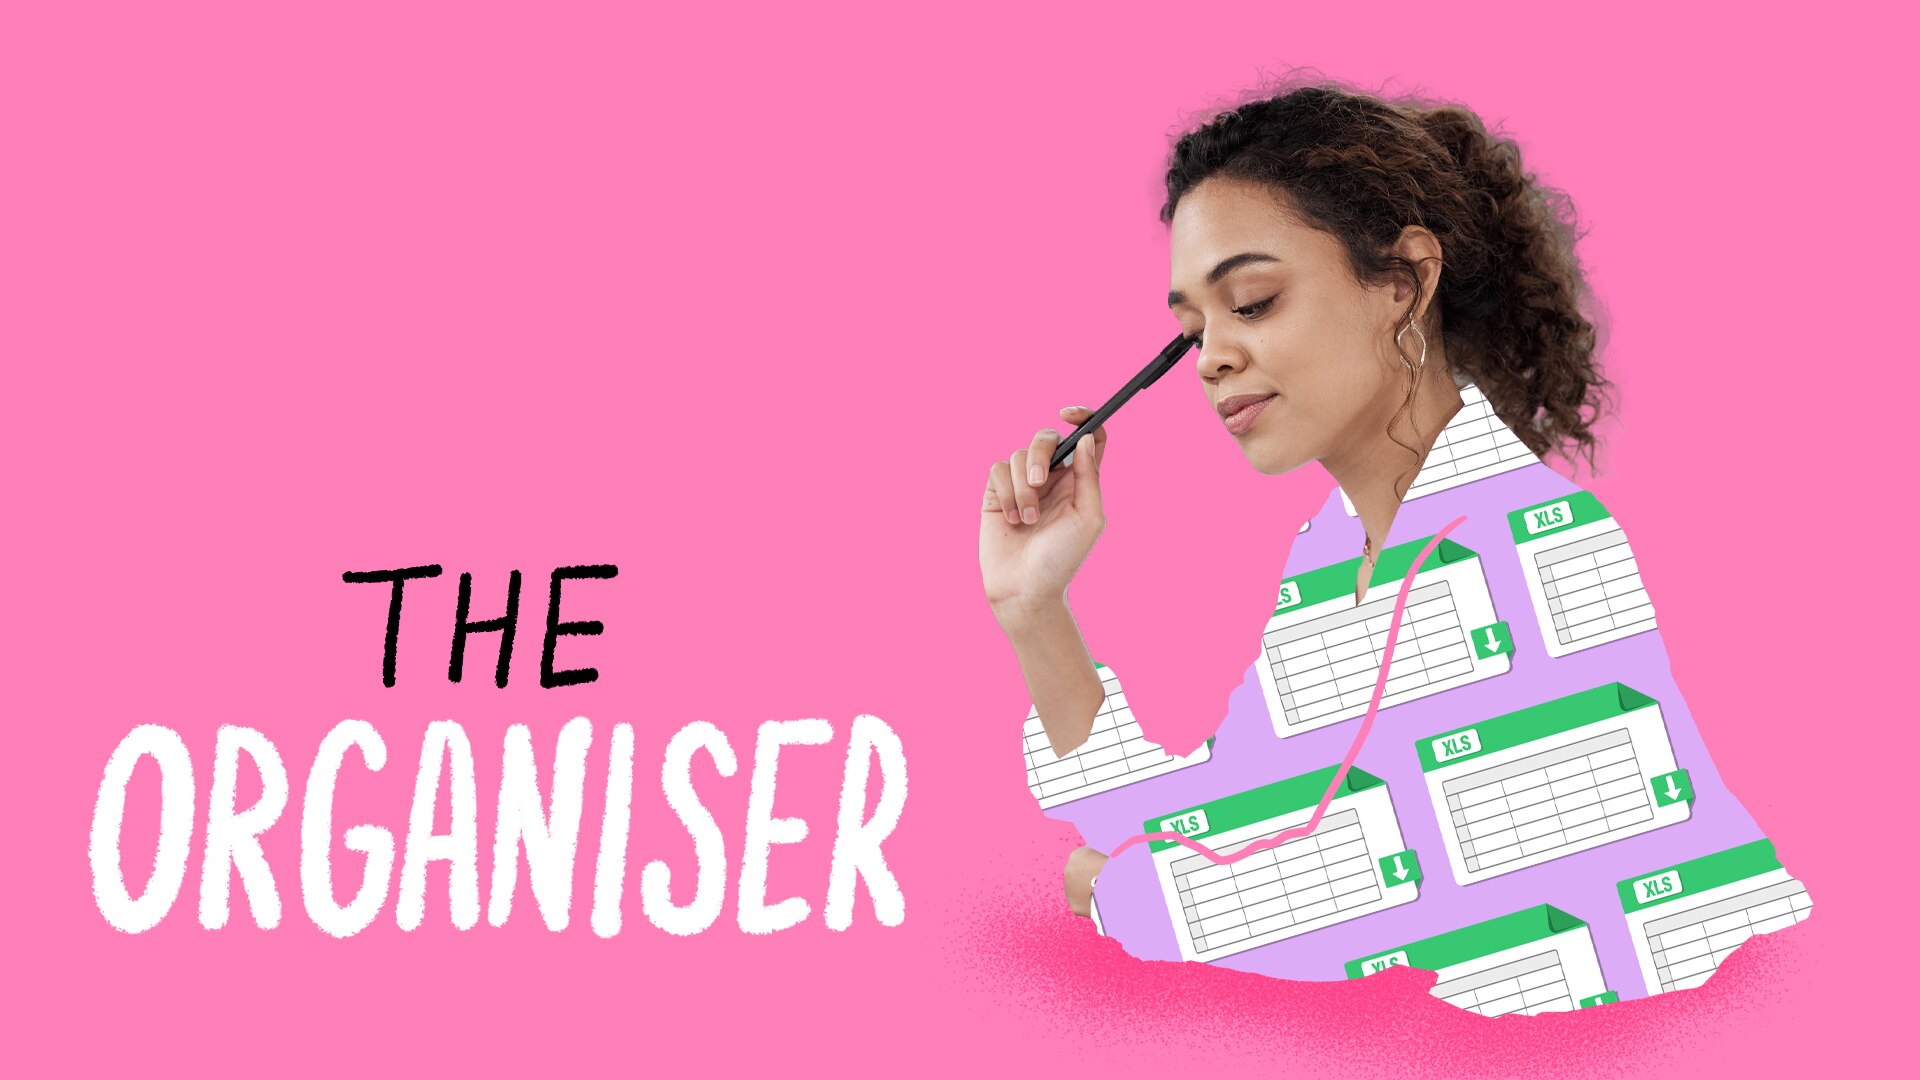 Subhead title: The Organiser. Pink background, woman sitting and thinking, holding pen to face, excel spreadsheet symbols around